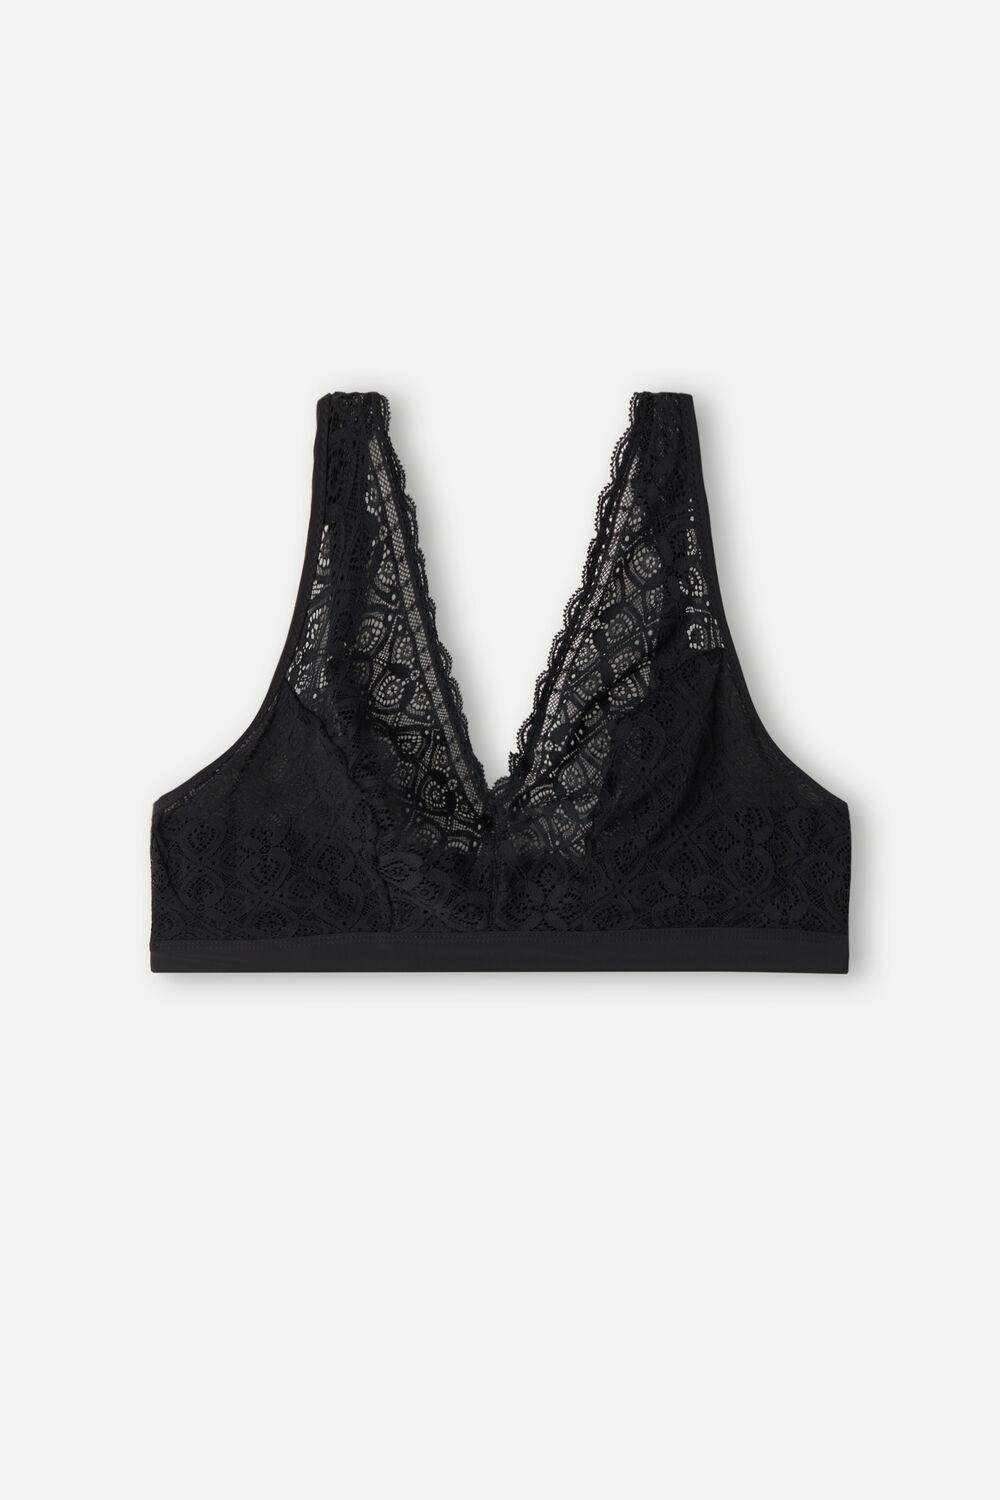 INTIMISSIMI - Fashion month is here! Don't forget your trendiest lingerie.